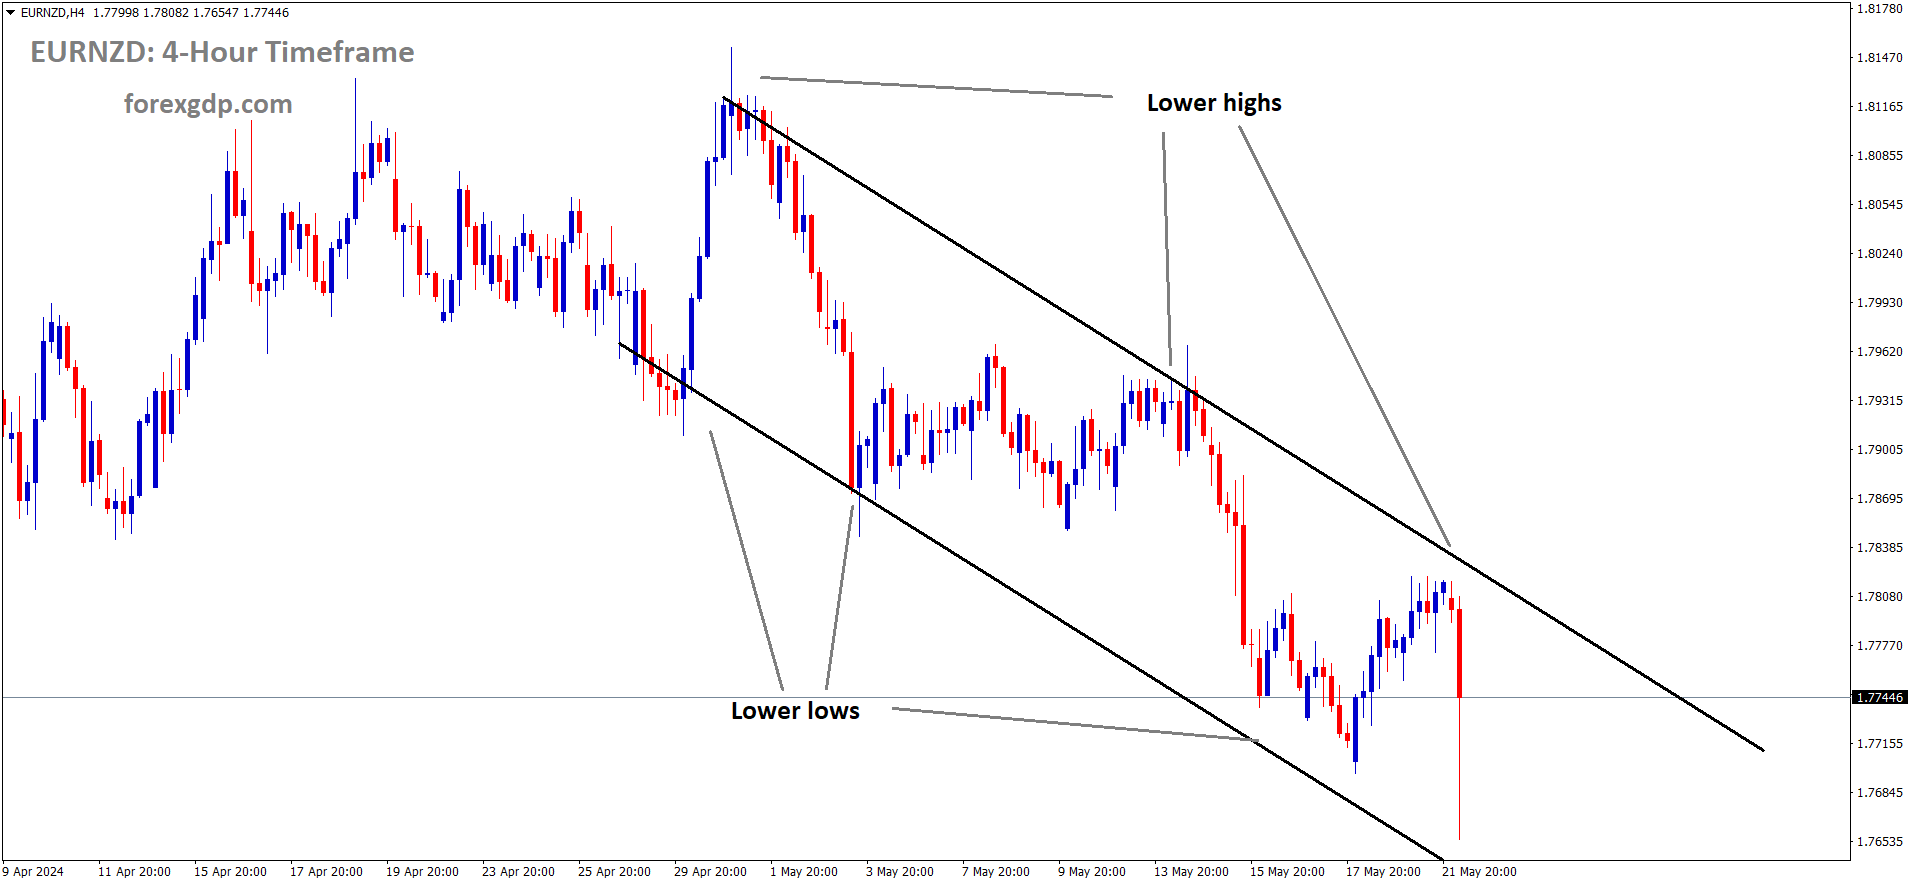 EURNZD is moving in Descending channel and market has fallen from the lower high area of the channel